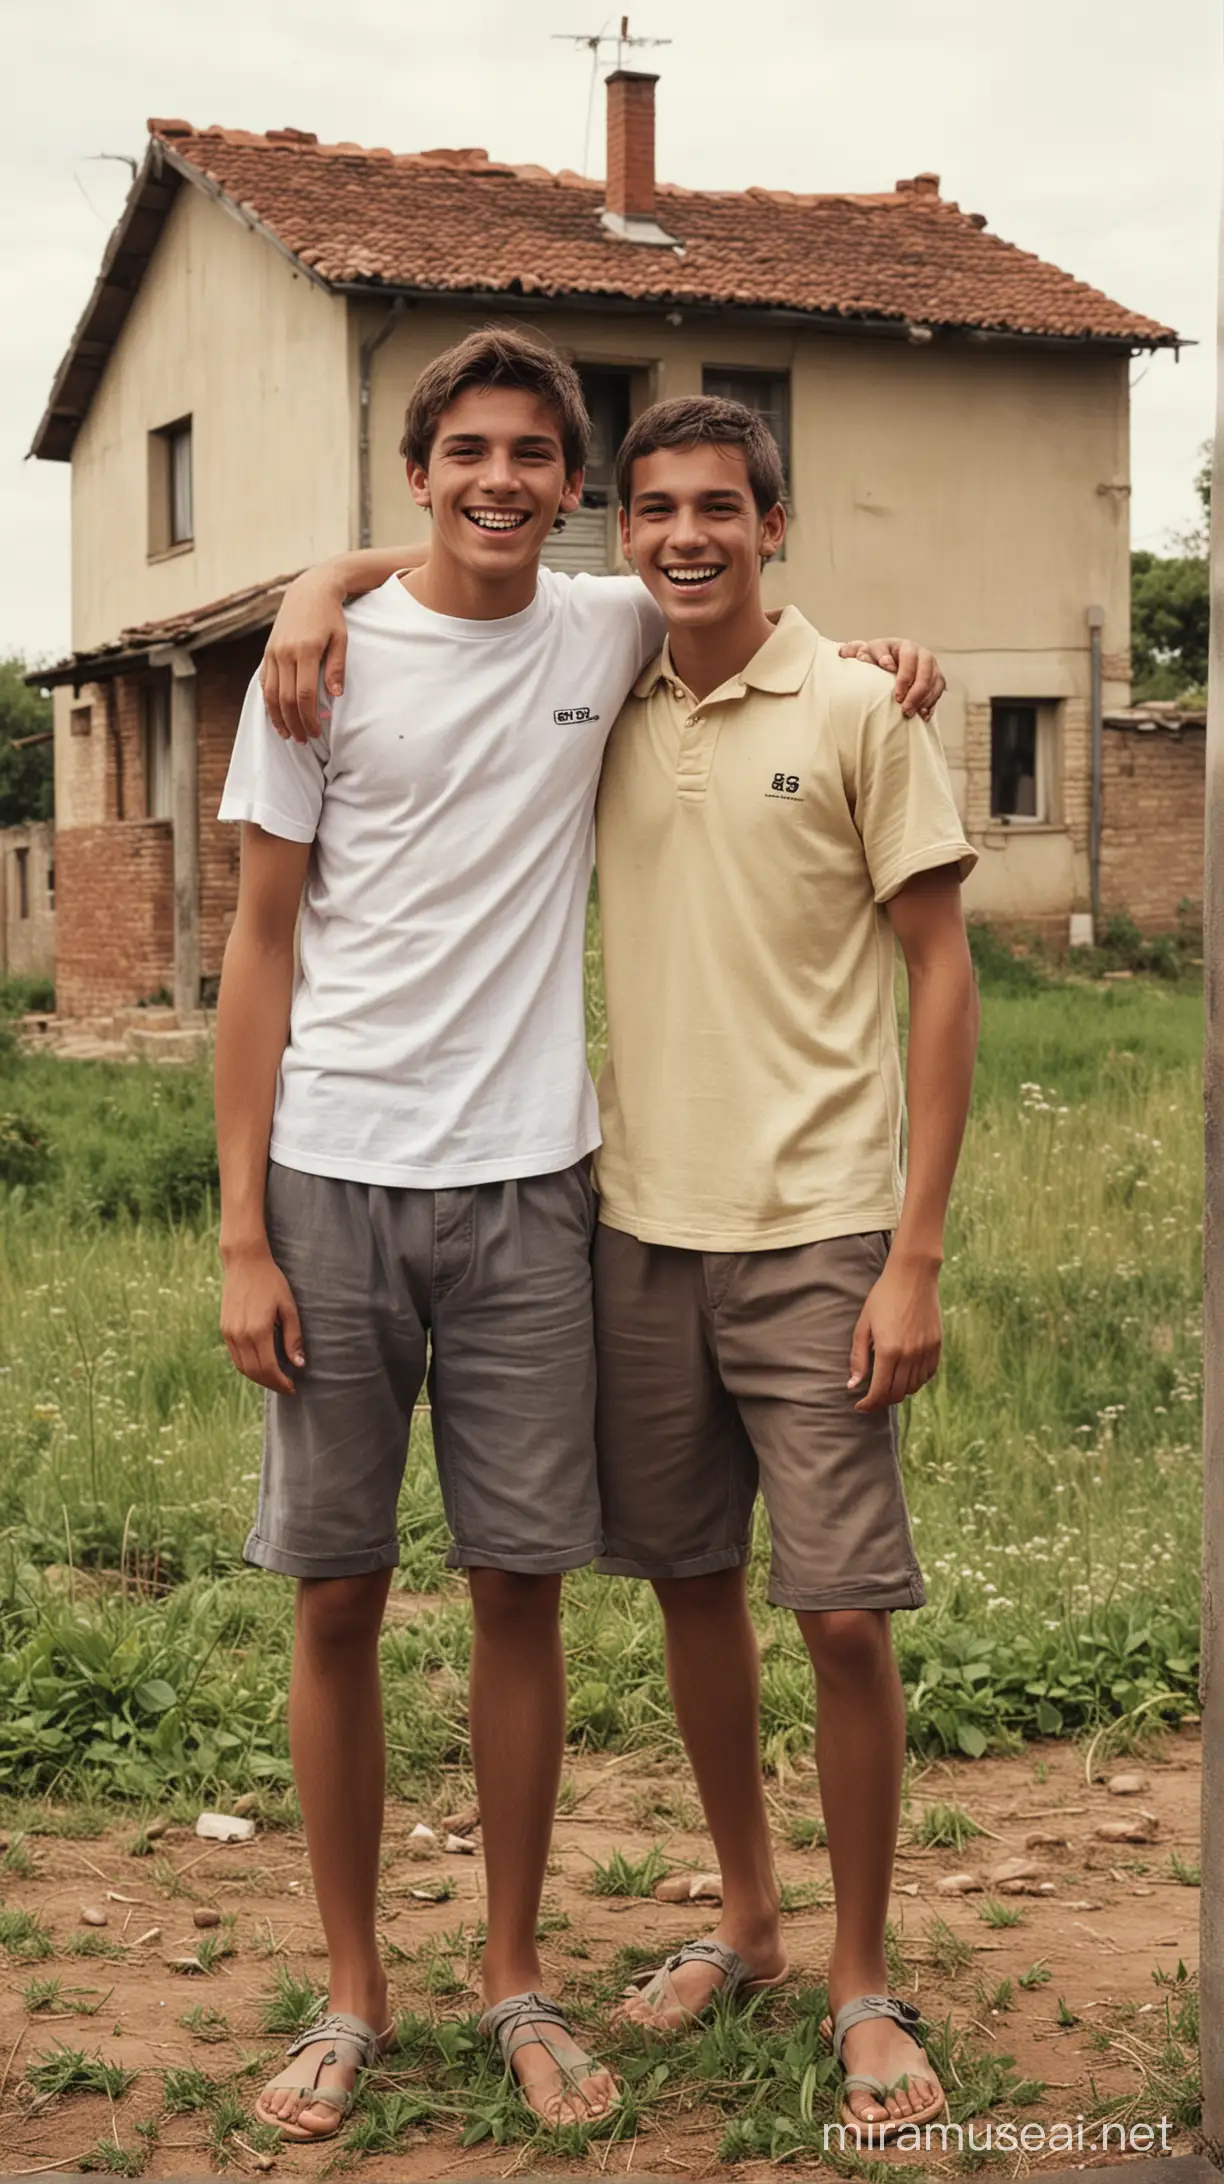 Two joyous brothers aged 20 with a home in the background